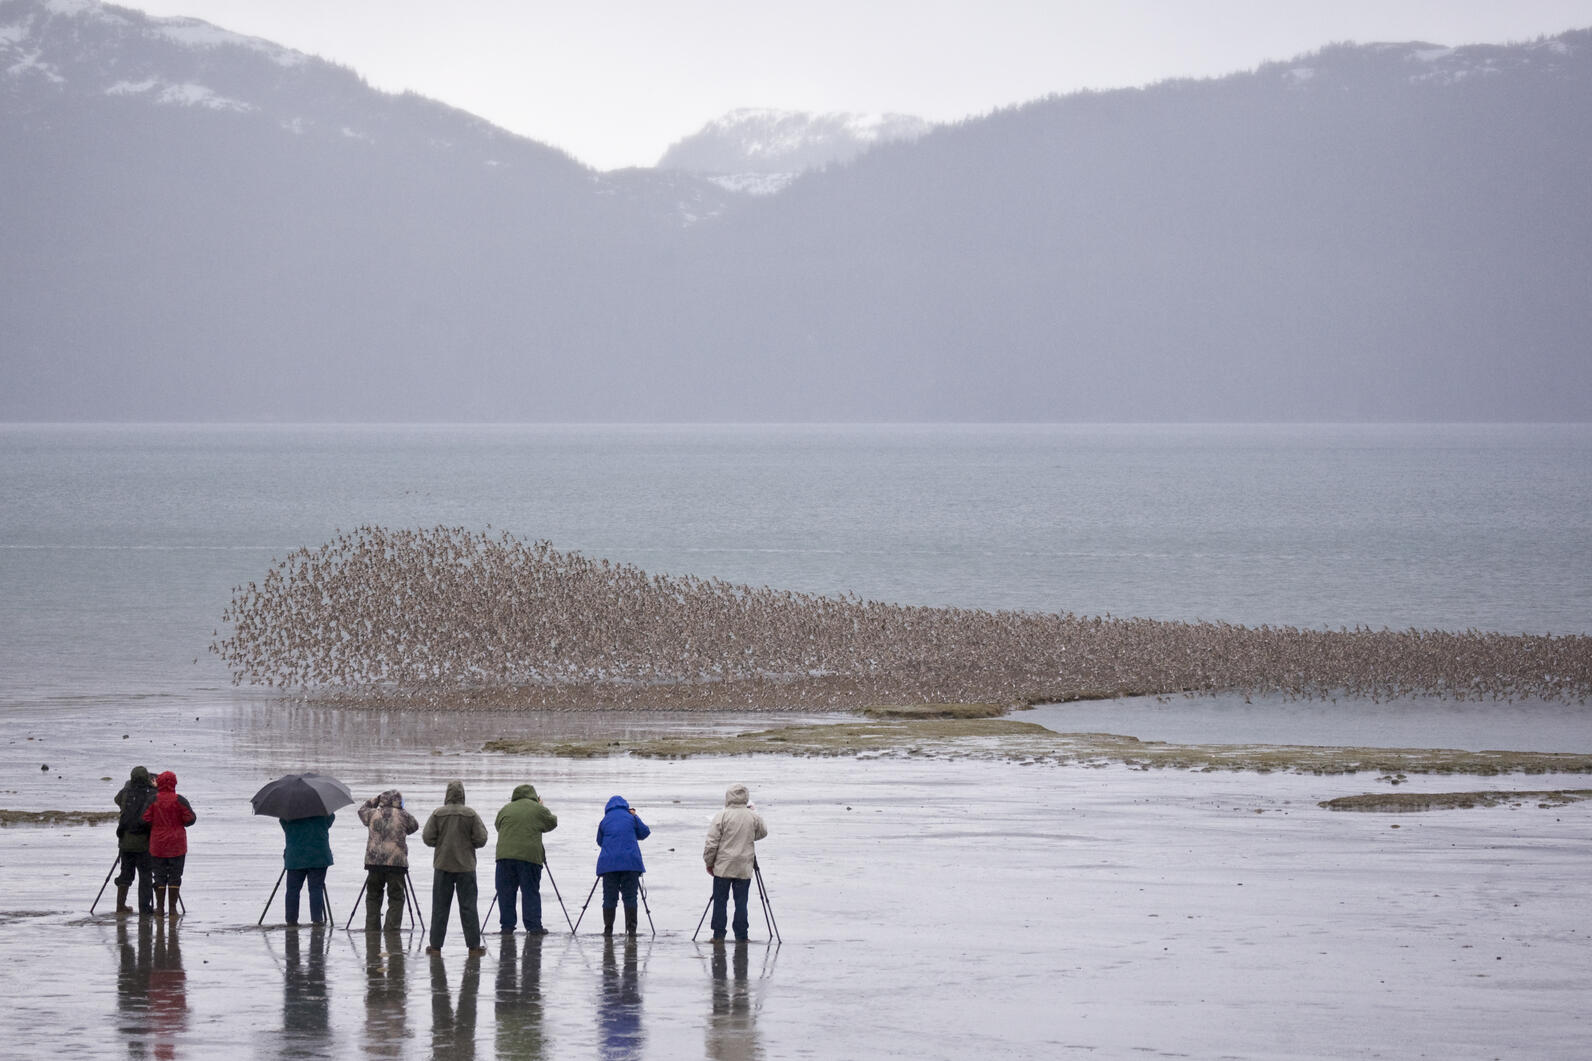 Crowd on beach photographing flock of birds